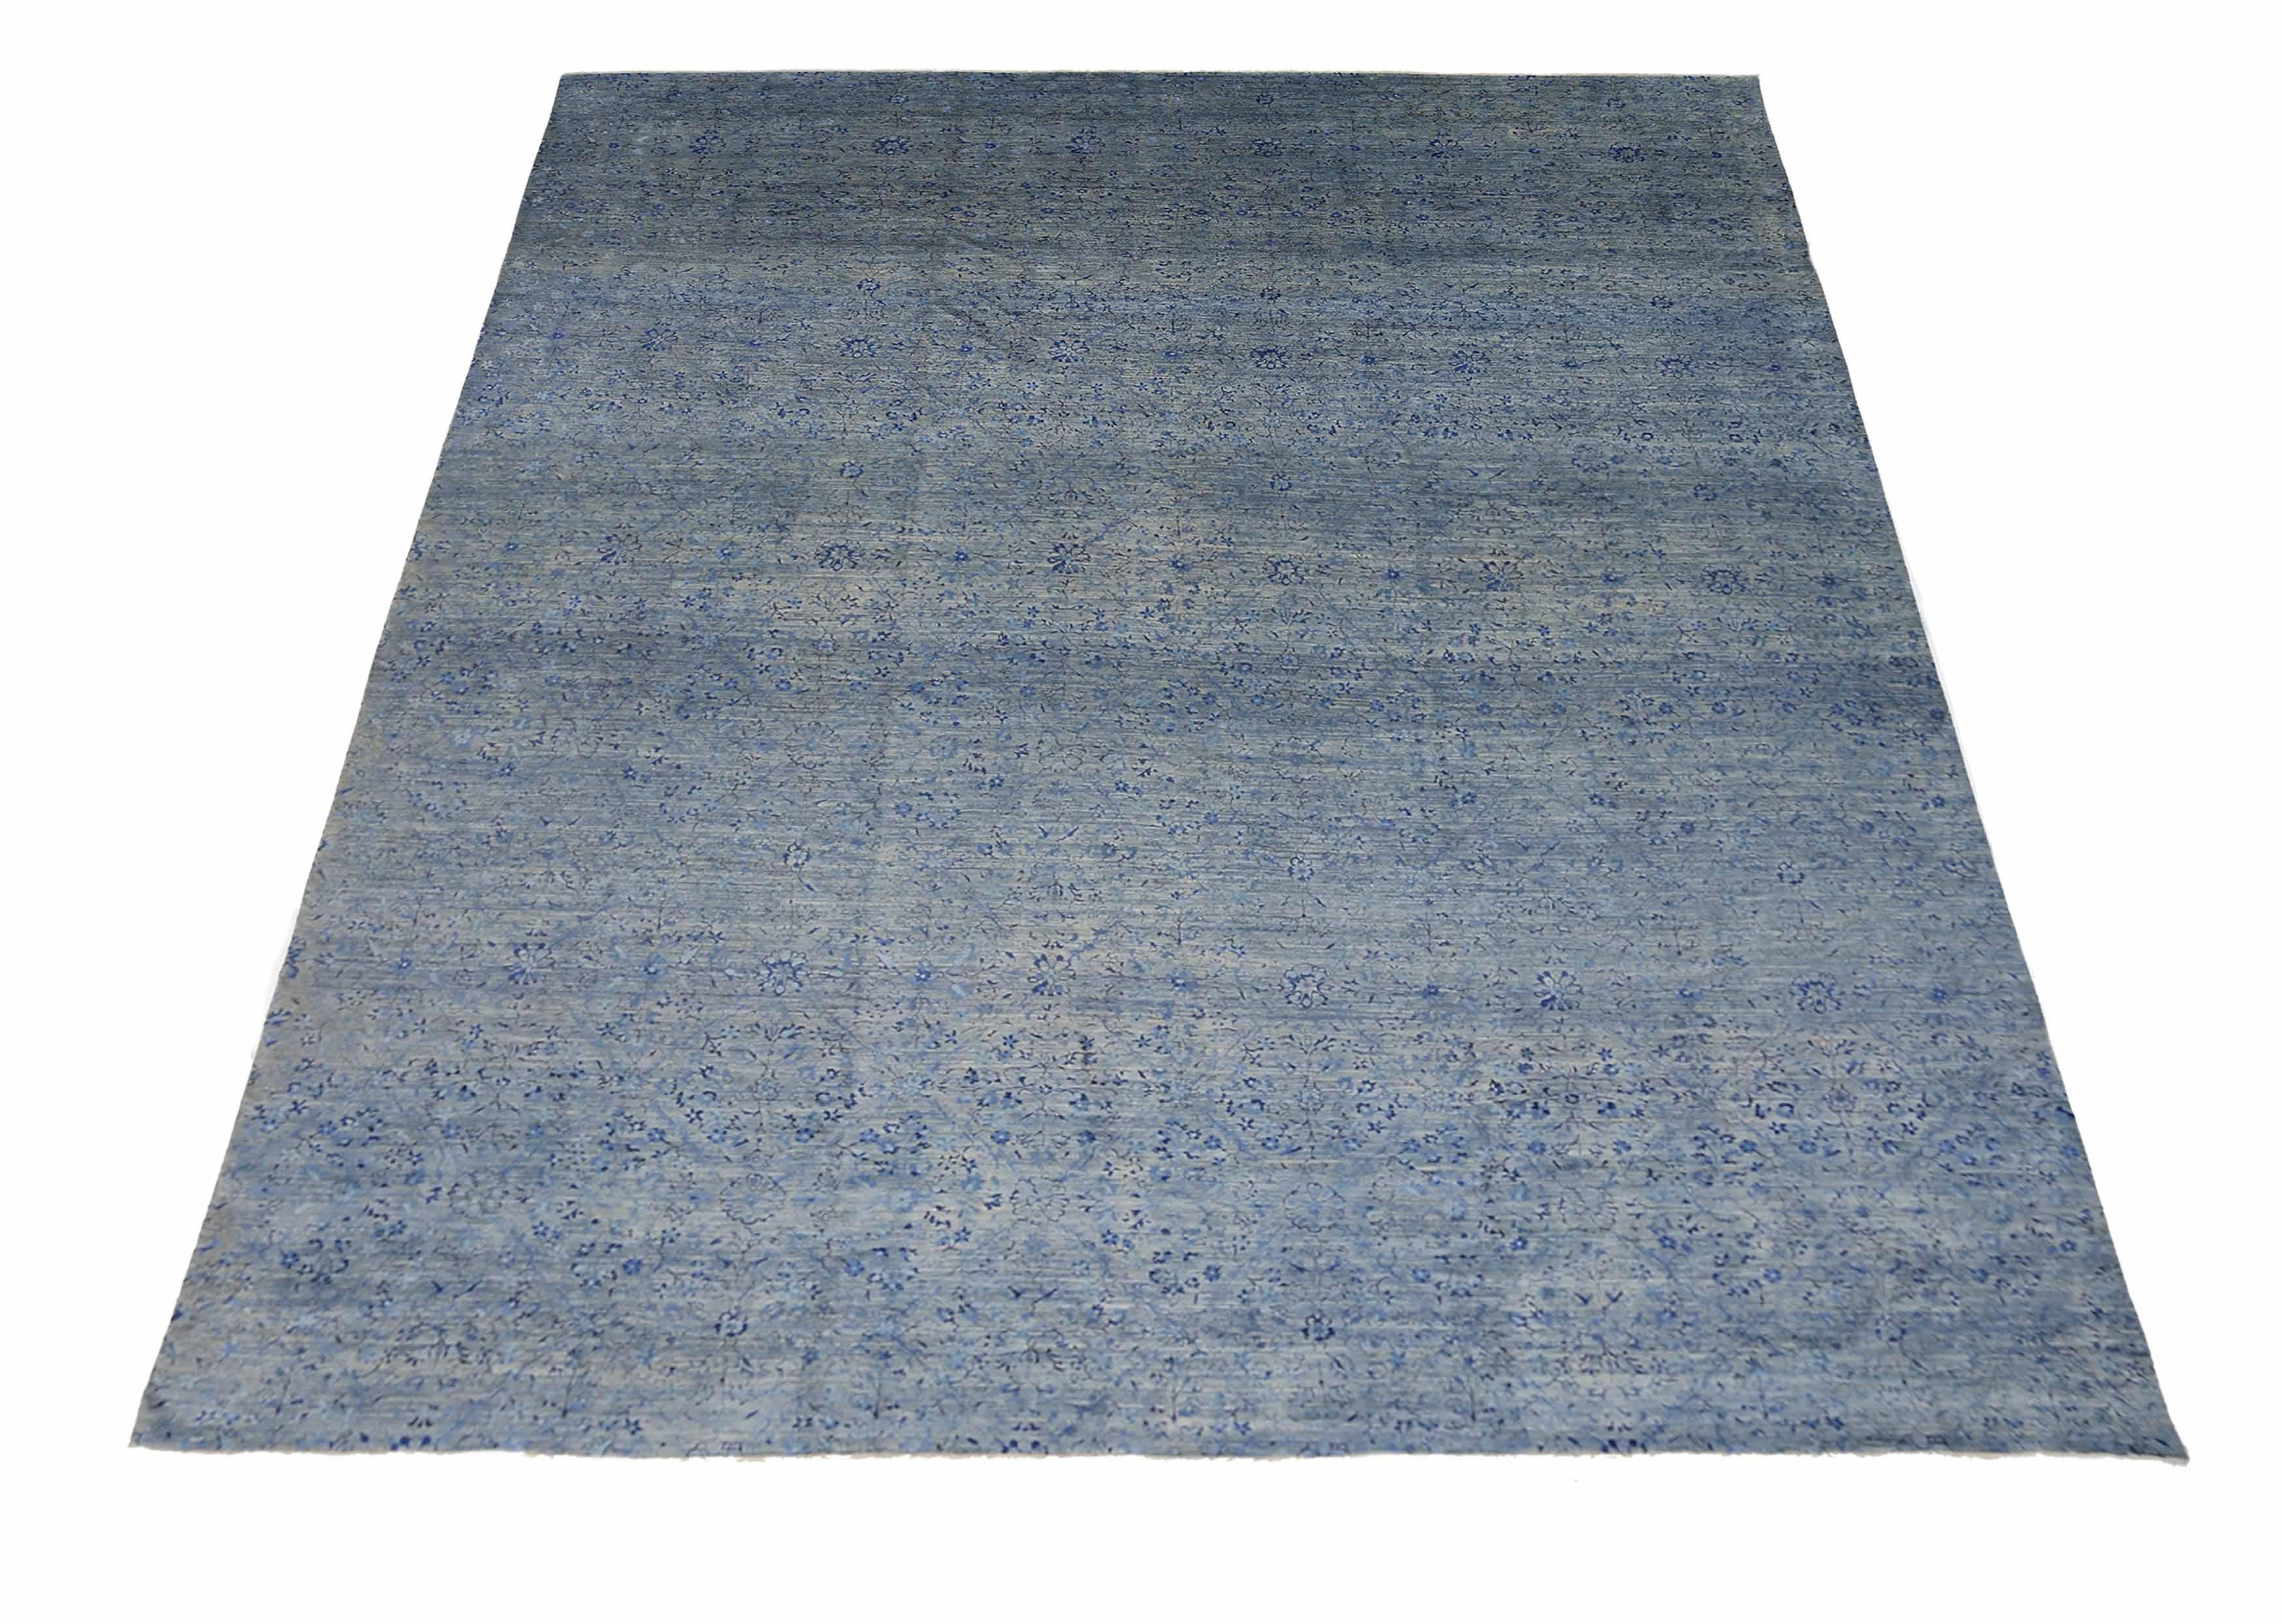 New area rug handwoven from the finest sheep’s wool. It’s colored with all-natural vegetable dyes that are safe for humans and pets. It’s a transitional design handwoven by expert artisans. It’s a lovely area rug that can be incorporated with